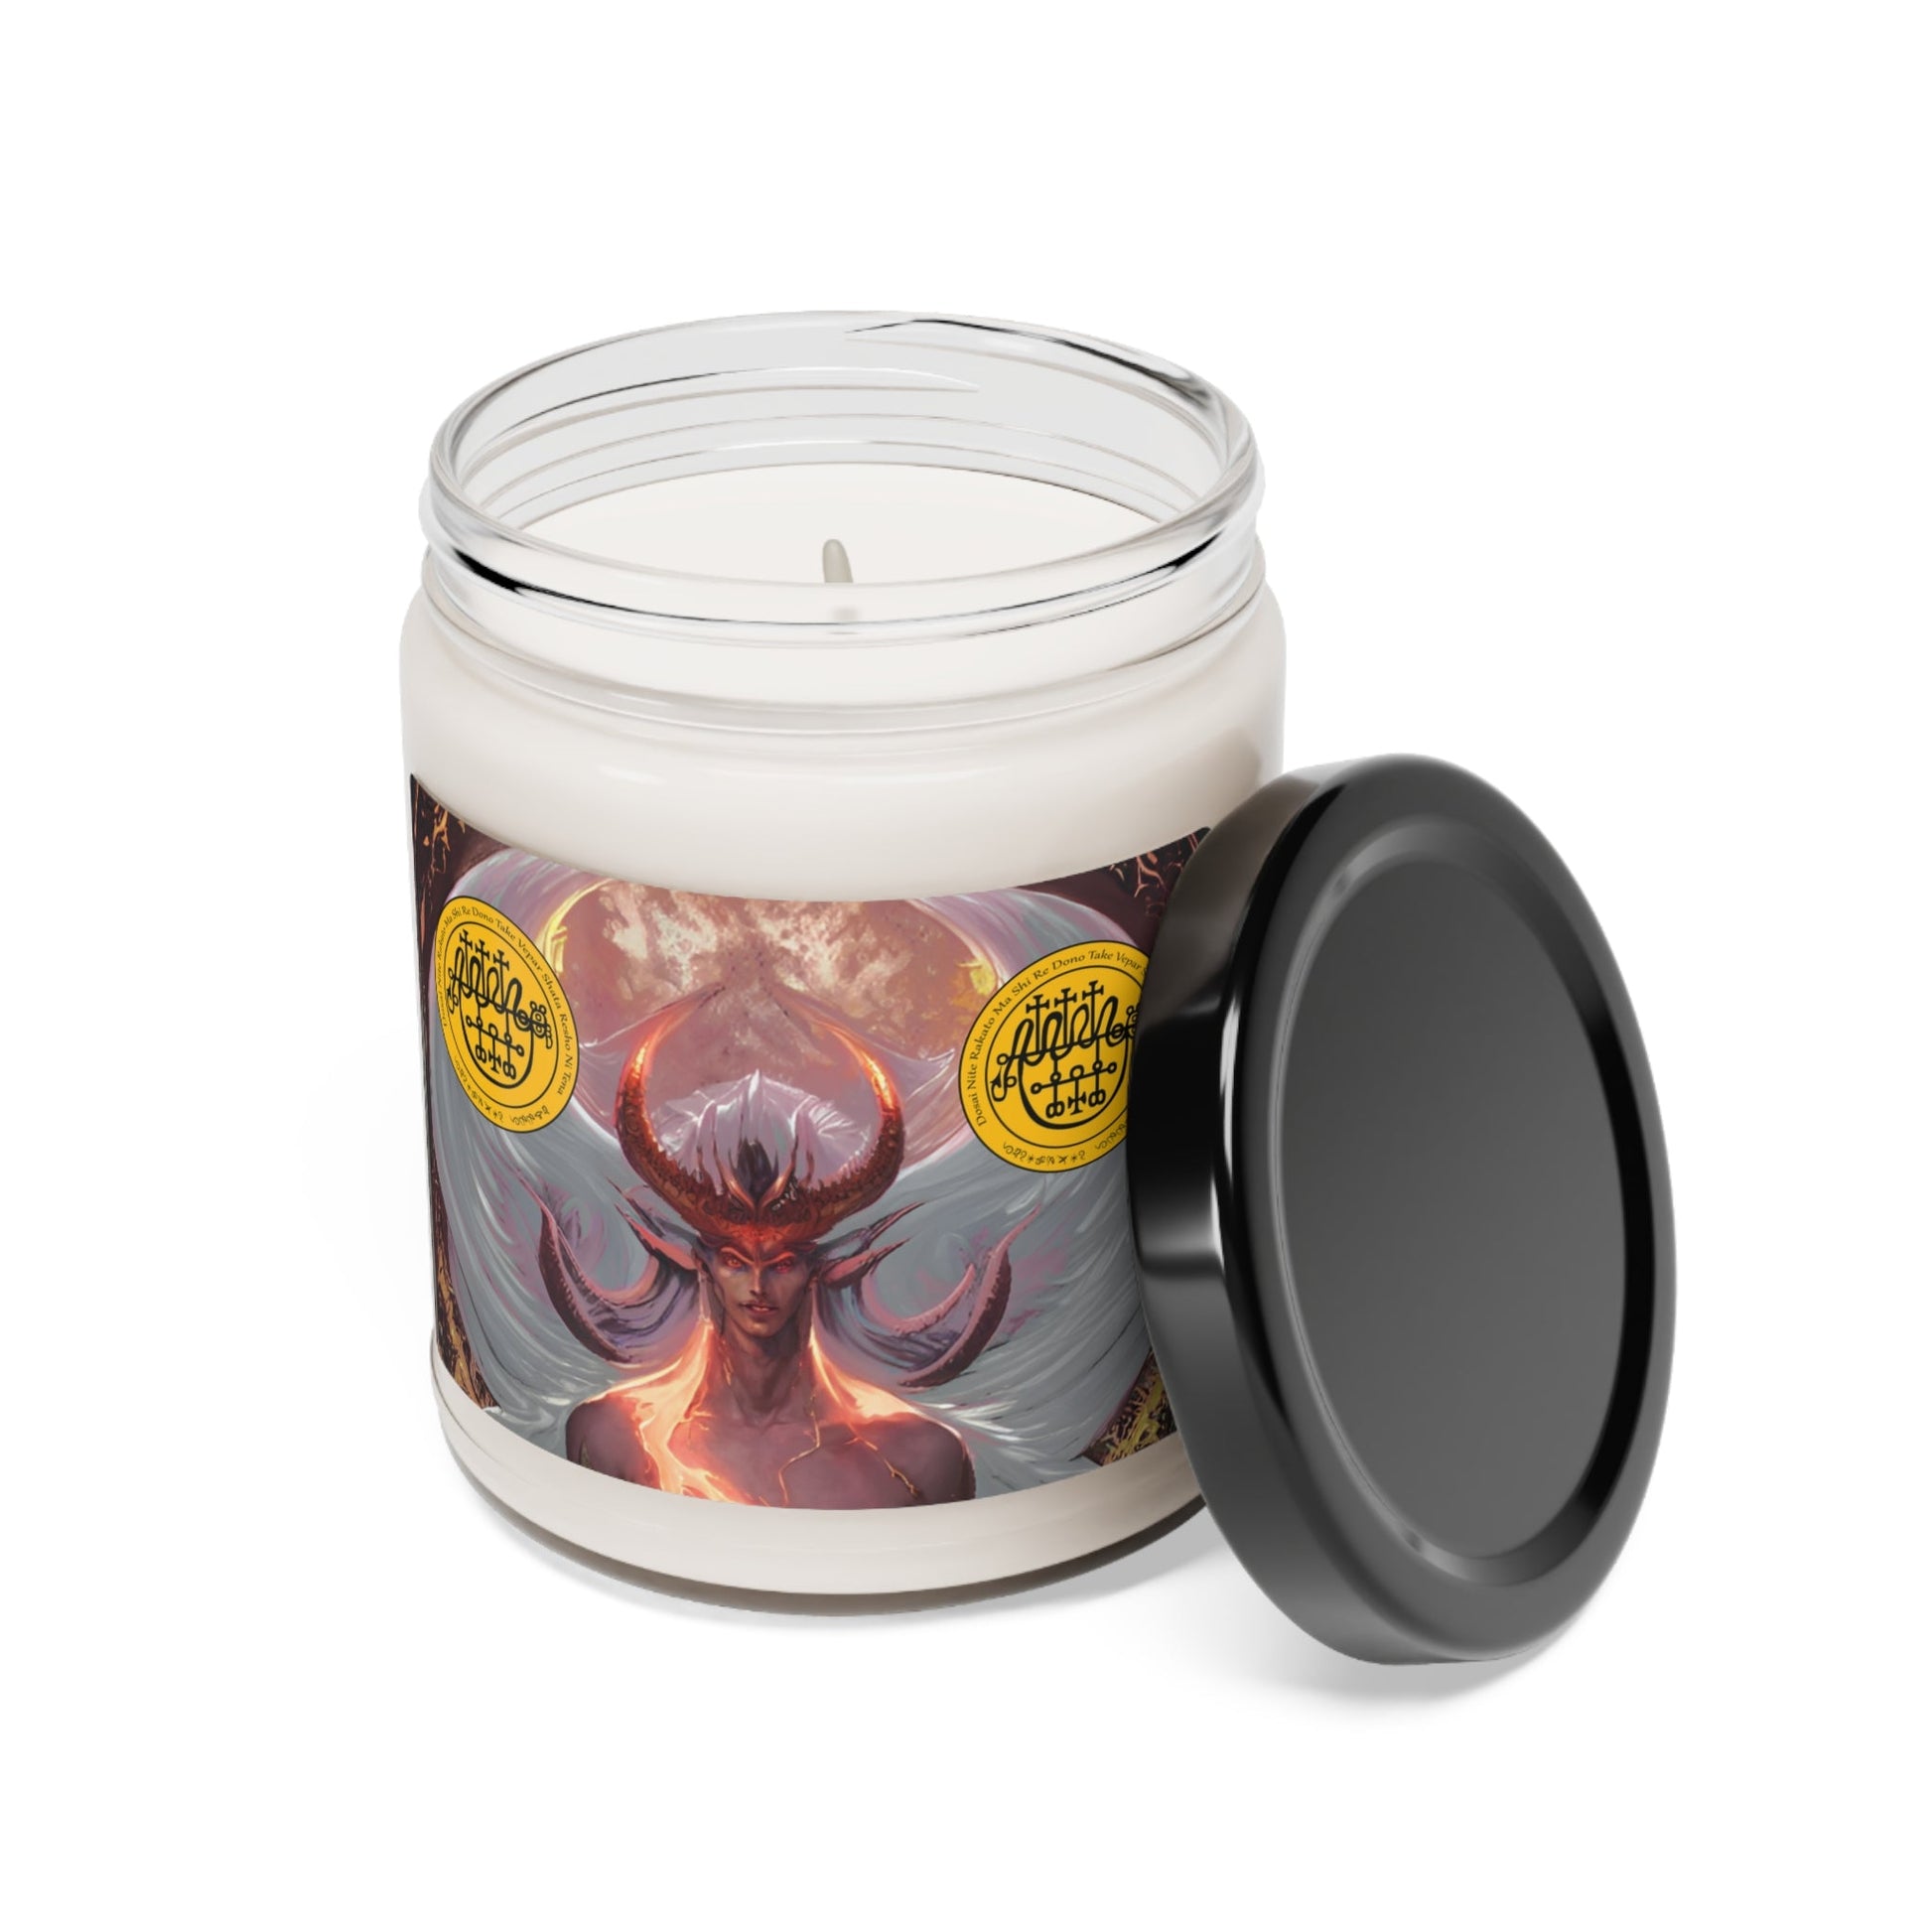 Demon-Vepar-Altar-Scented-Soy-Candle-for-offerings-rituals-initiations-or-praying-and-meditation-22